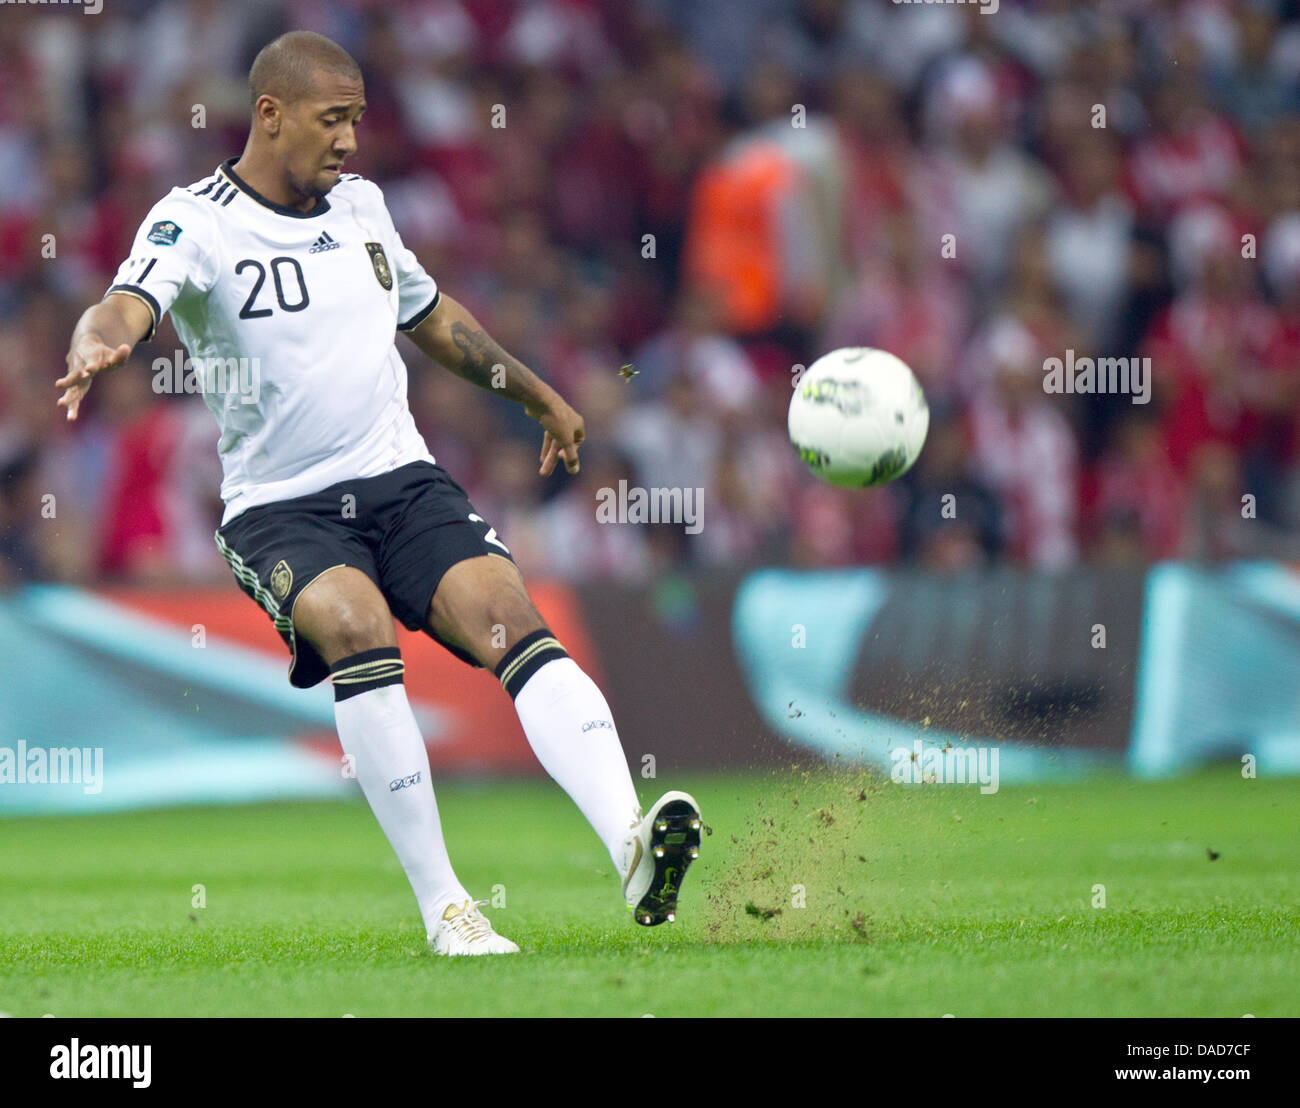 Germanys Jerome Boateng during the EURO 2012 qualifying match between Turkey and Germany at the Turk Telekom Arena in Istanbul, Turkey 07 October 2011. Photo: Jens Wolf dpa Stock Photo